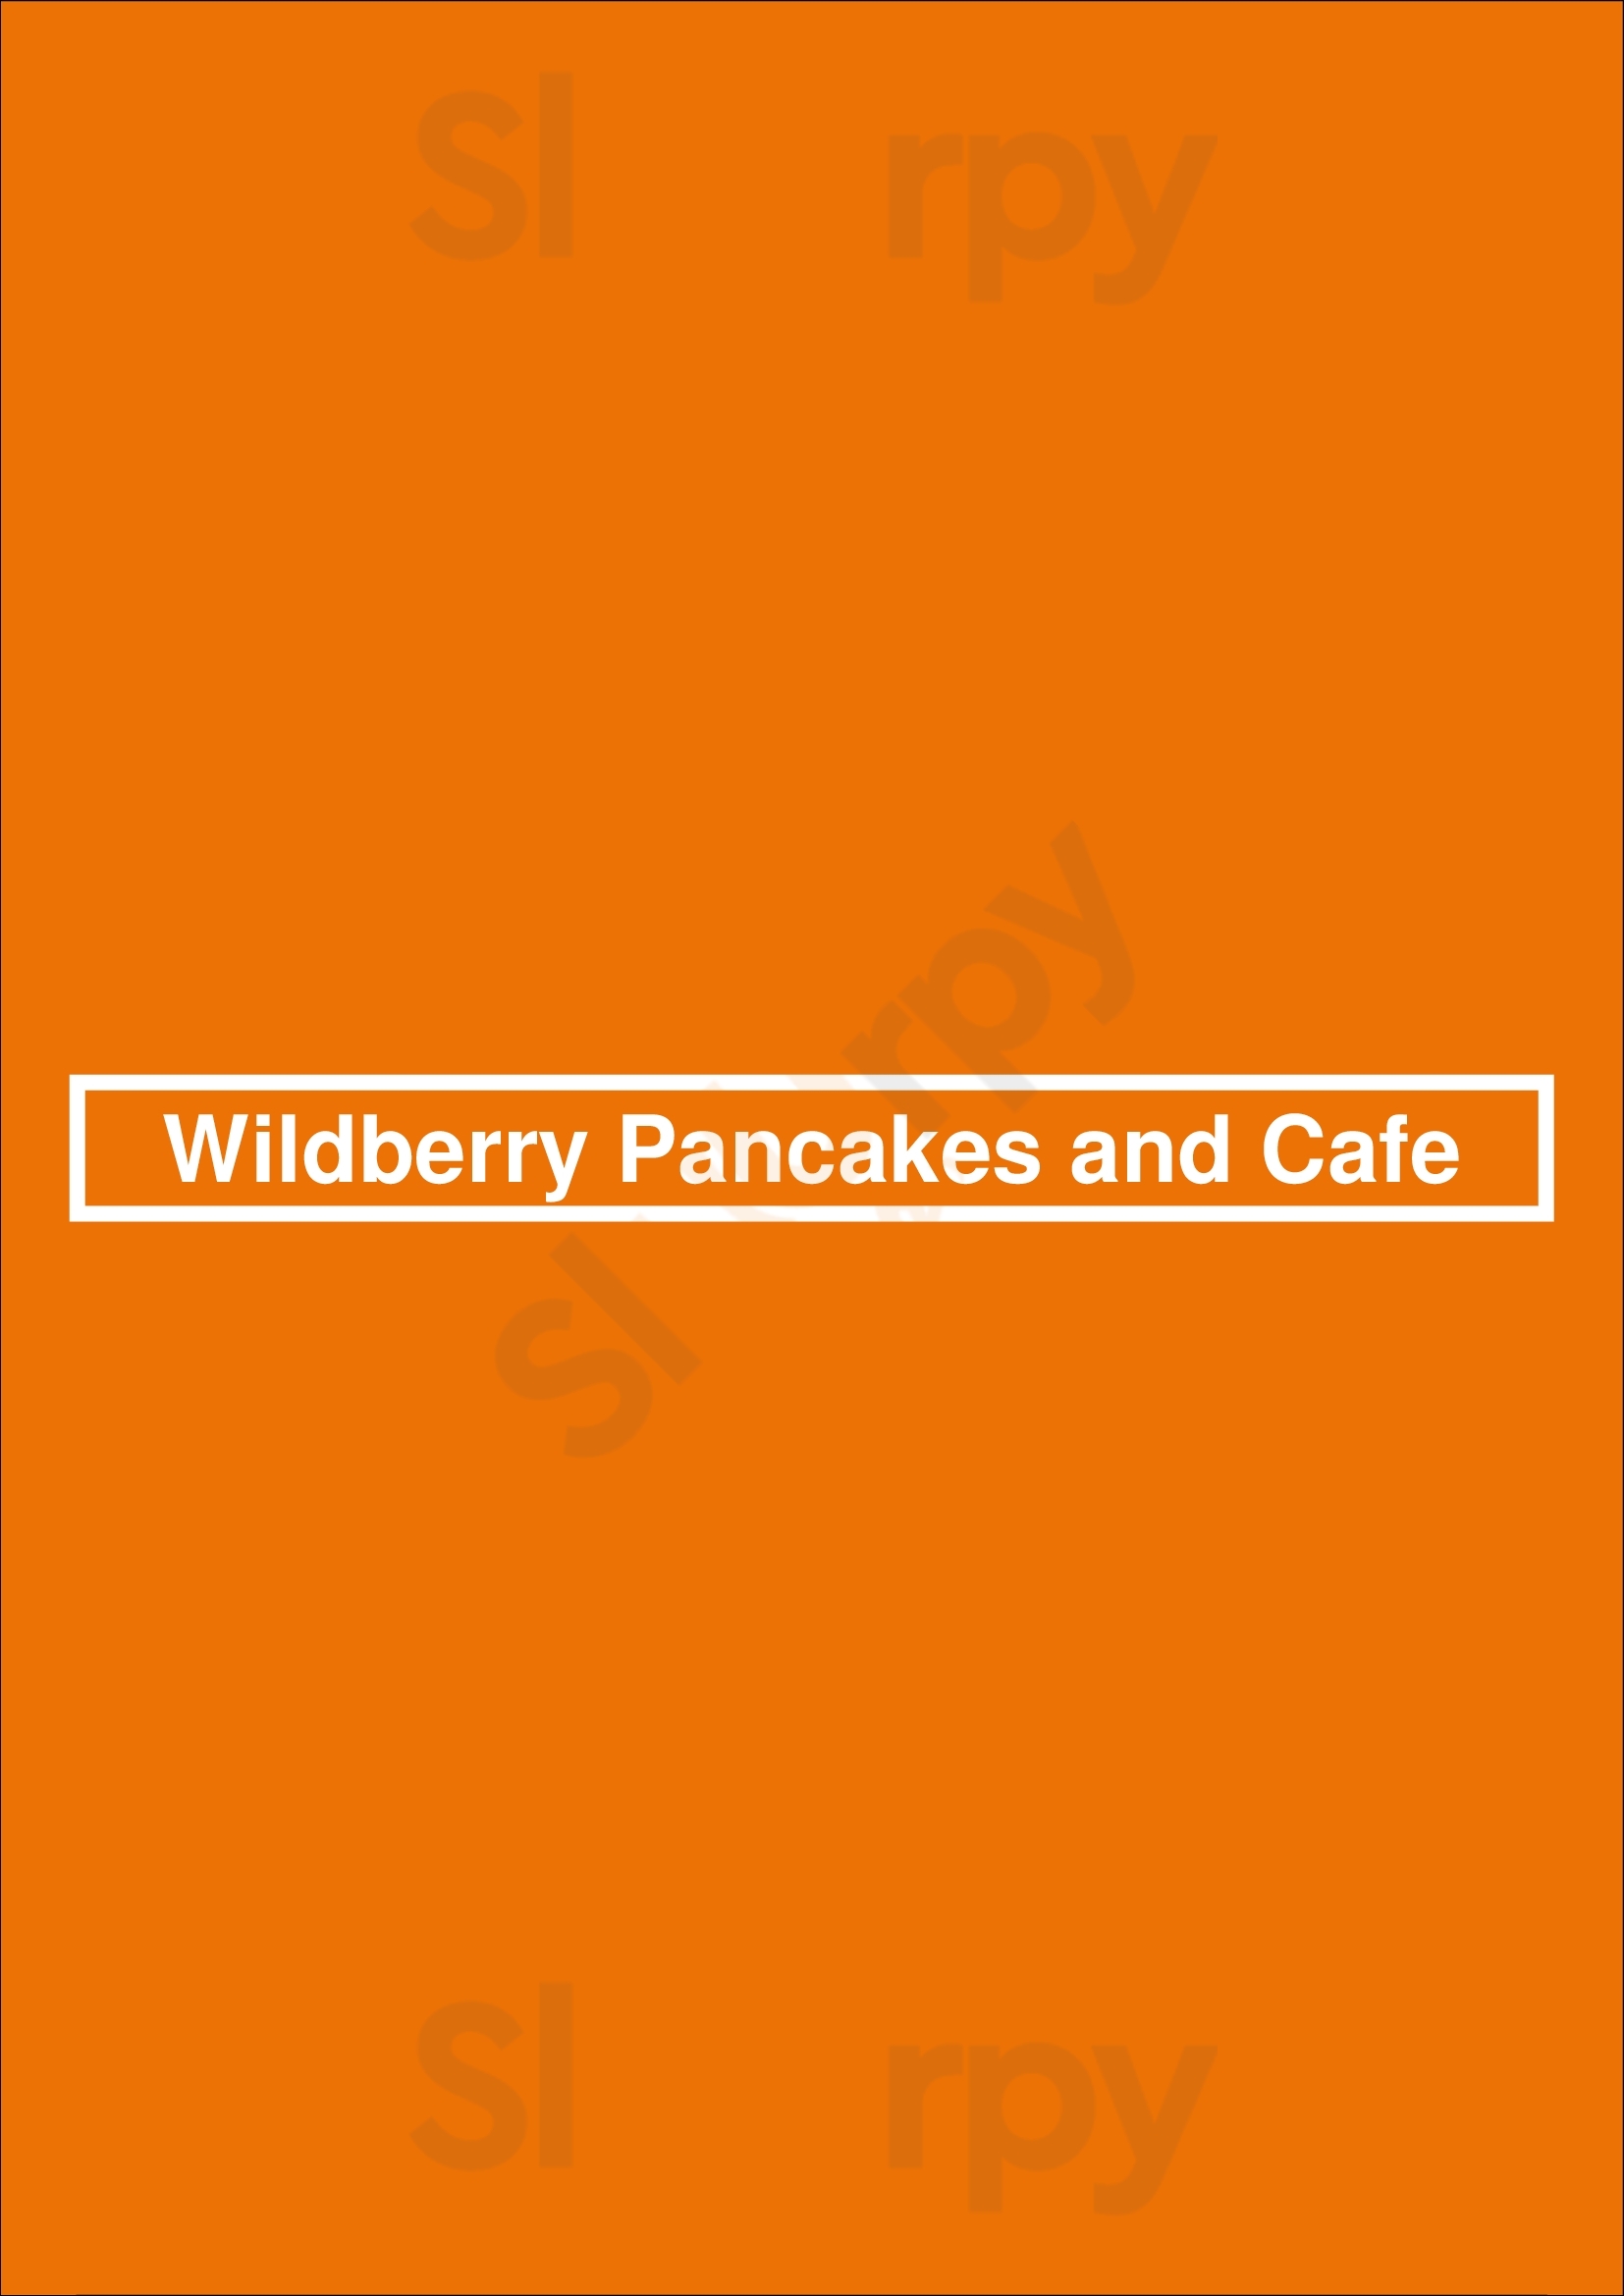 Wildberry Pancakes And Cafe Chicago Menu - 1